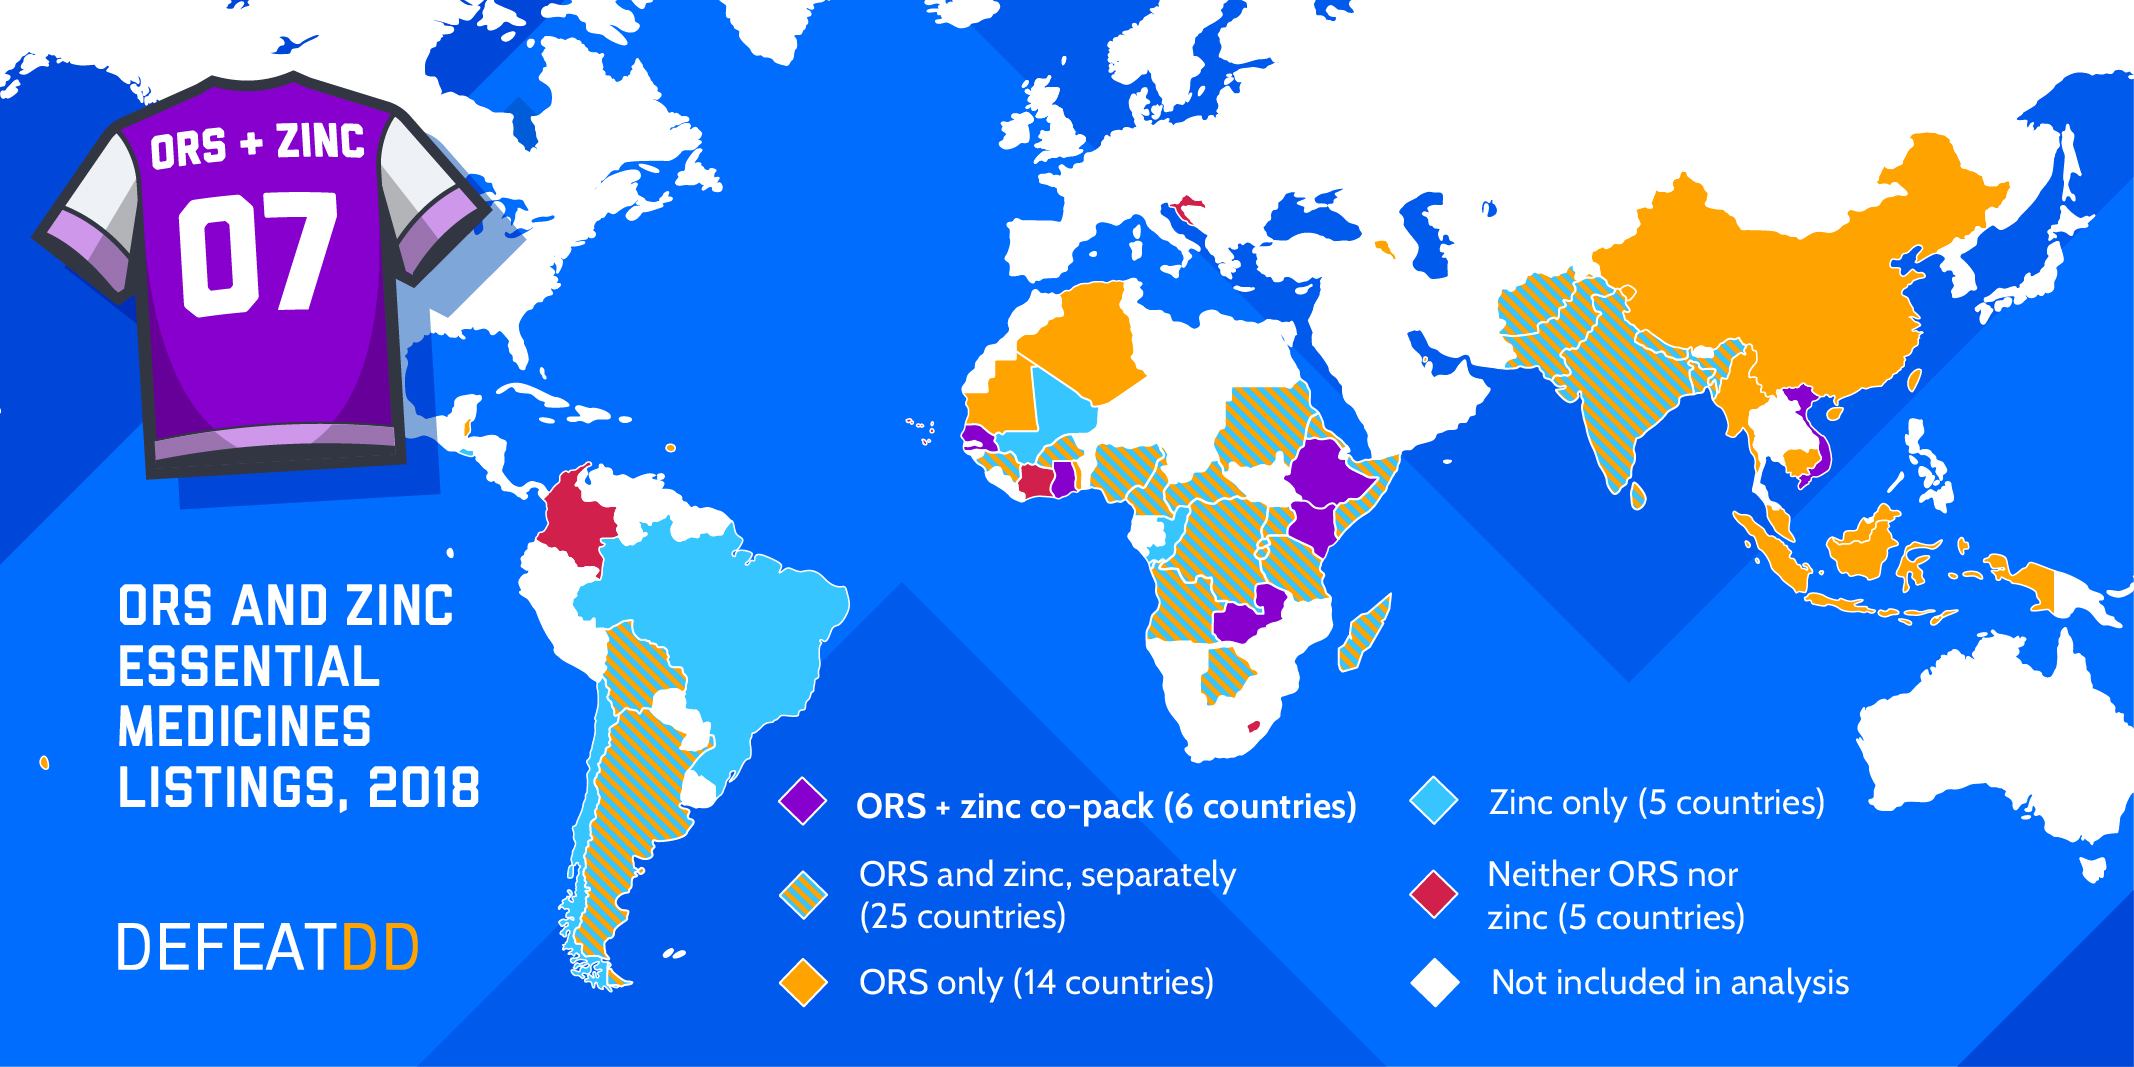 Map of ORS and Zinc essential medicines listings from 2018